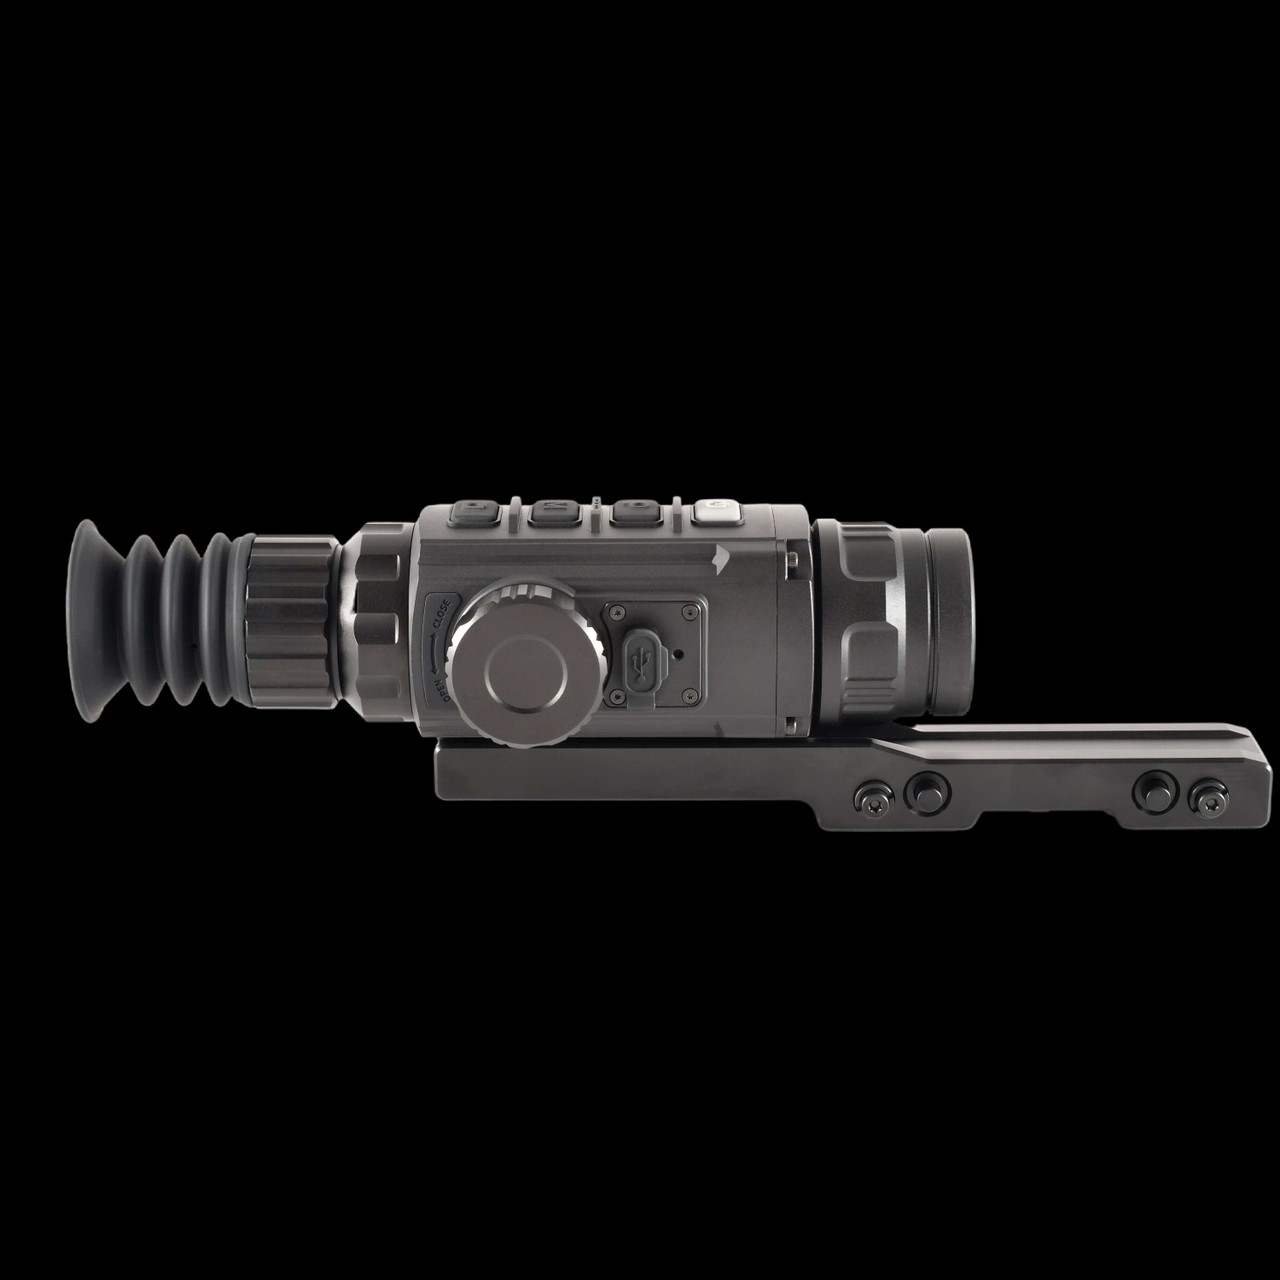 iRAY RICO G-LRF 384 35mm LRF Thermal Weapon Sight (GL35R) InfiRay Outdoor IRAY-GL35R 3799